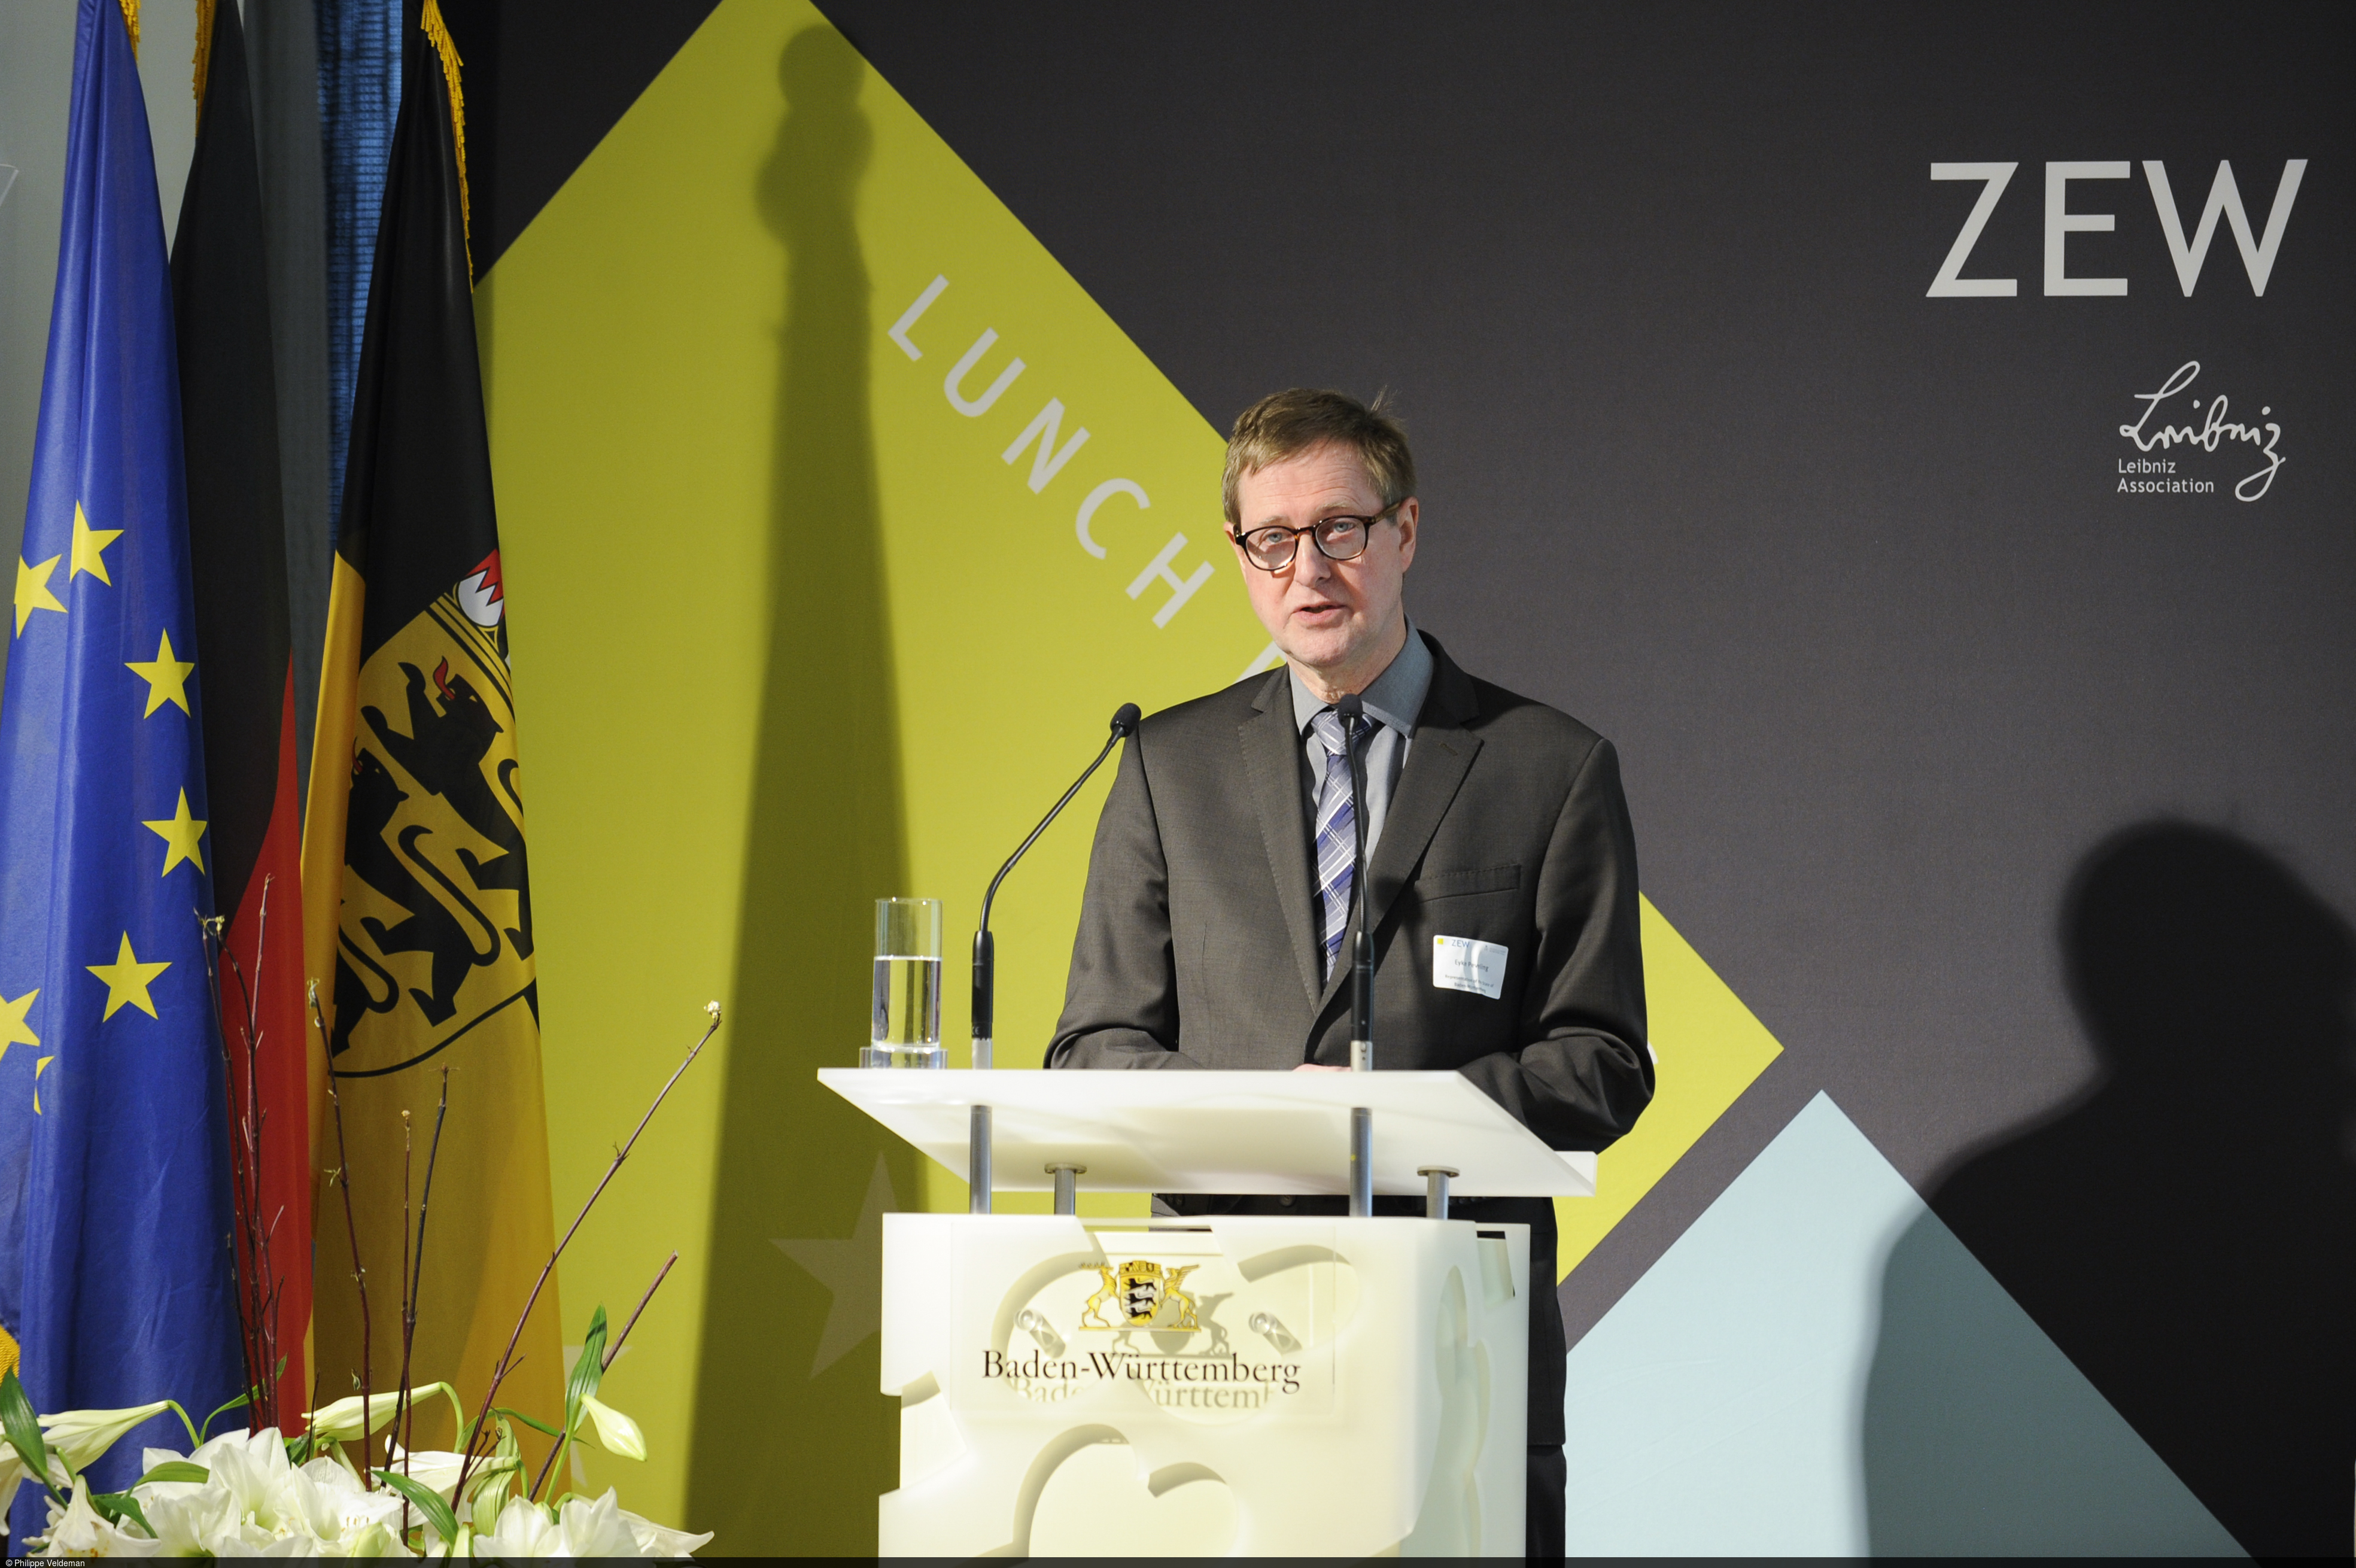 Eyke Peveling welcoming the guests on behalf of the Baden-Württemberg State Representation in Brussels.